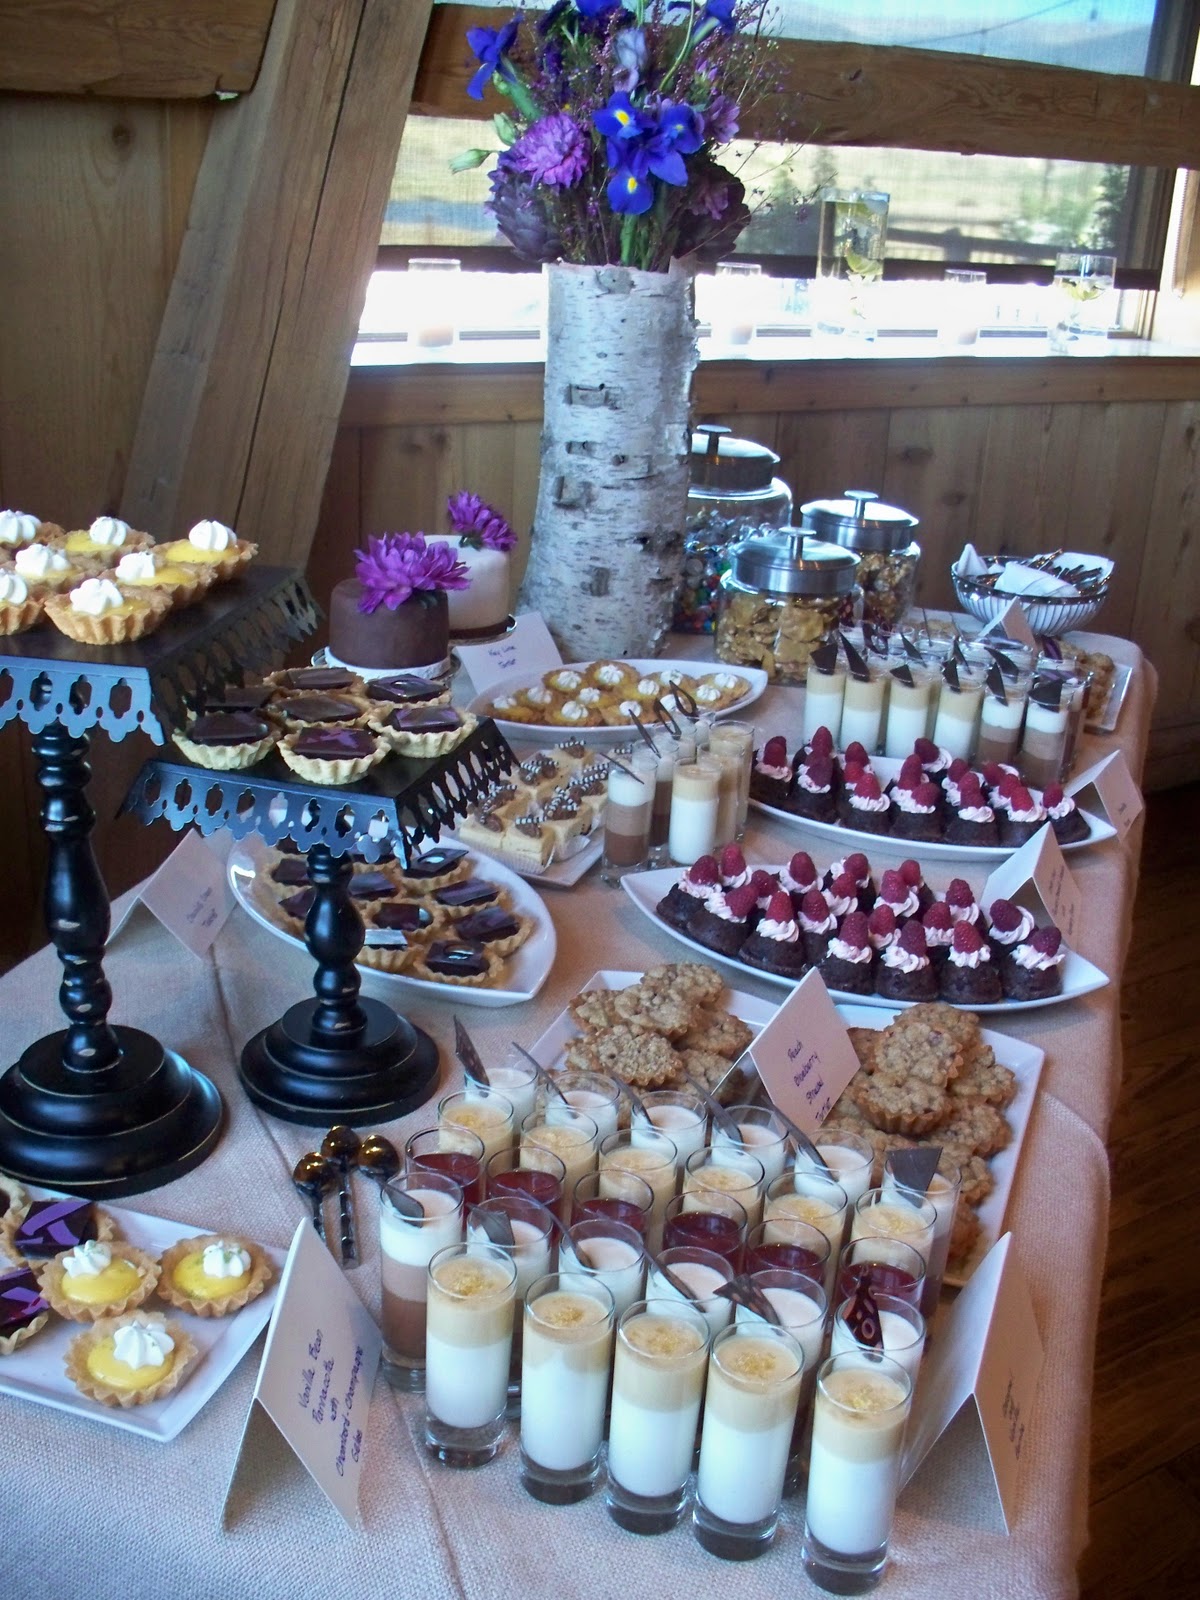 Teacup, Fine baked goods and confections: Dessert table ...